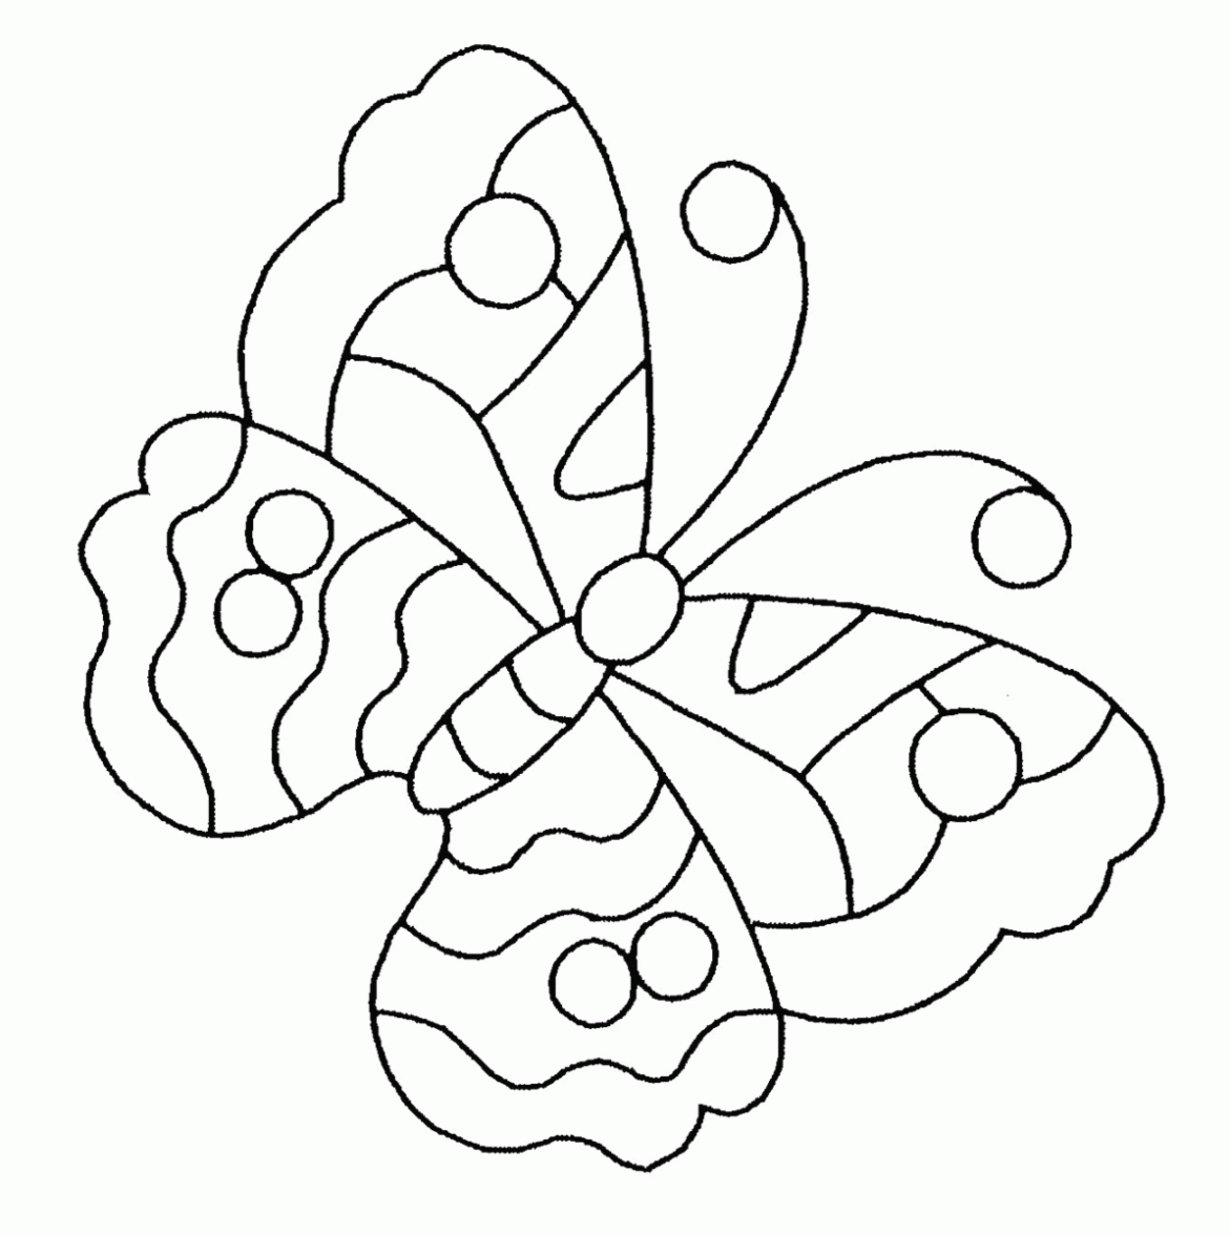 Free Printable Butterfly Coloring Pages For Kids Coloring Wallpapers Download Free Images Wallpaper [coloring654.blogspot.com]